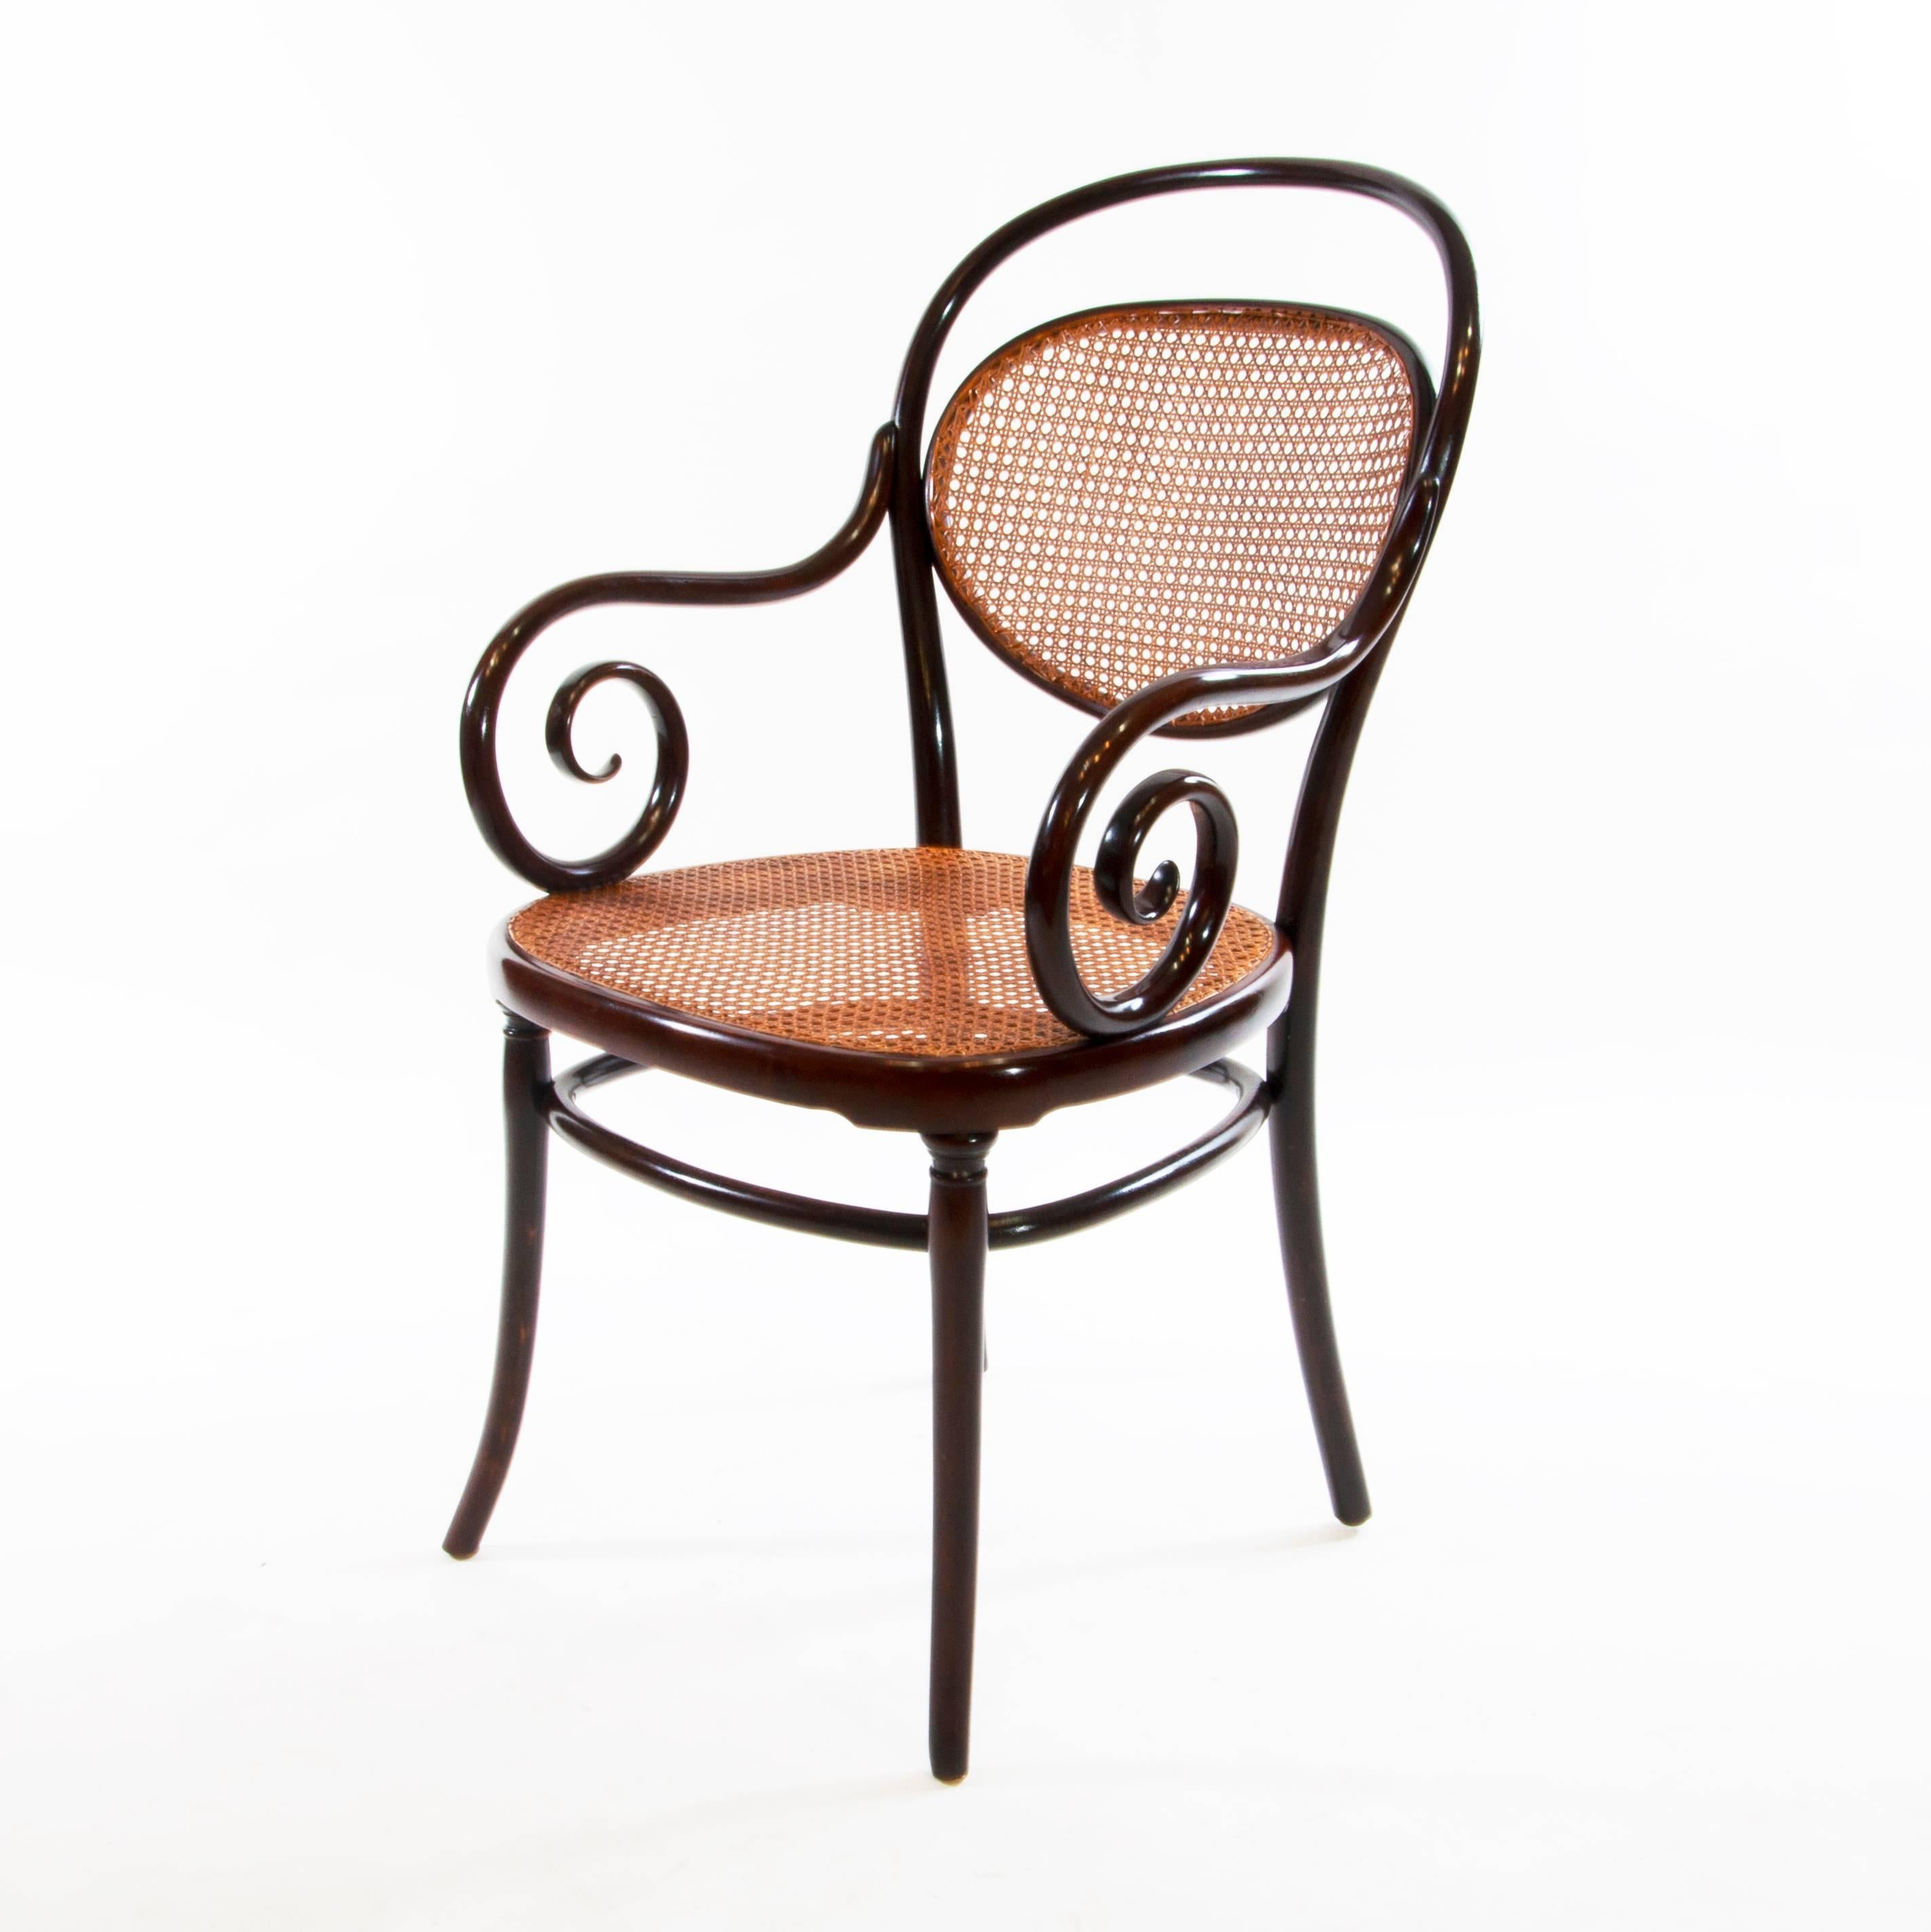 Antique Thonet bentwood armchair fauteuil No. 11, designed 1860 by the Gebruder Thonet.
Very rare and antique Thonet chair, which was manufactured between 1895-1910.
The company Thonet was founded by Michael Thonet and was greatly expanded by